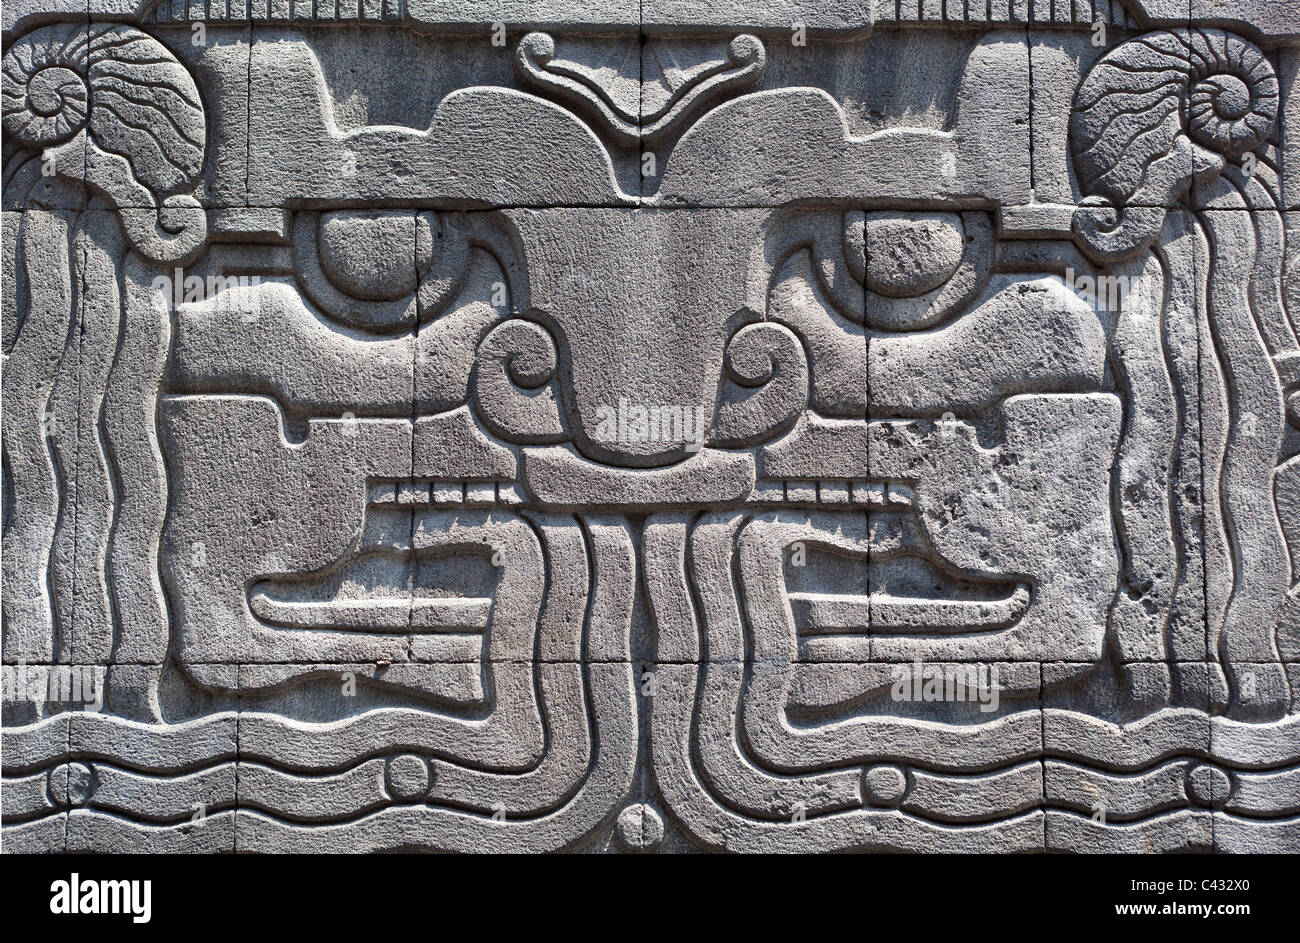 Carving in Stone in the wall outside The Museo de Arte Popular Mexico City Mexico Stock Photo